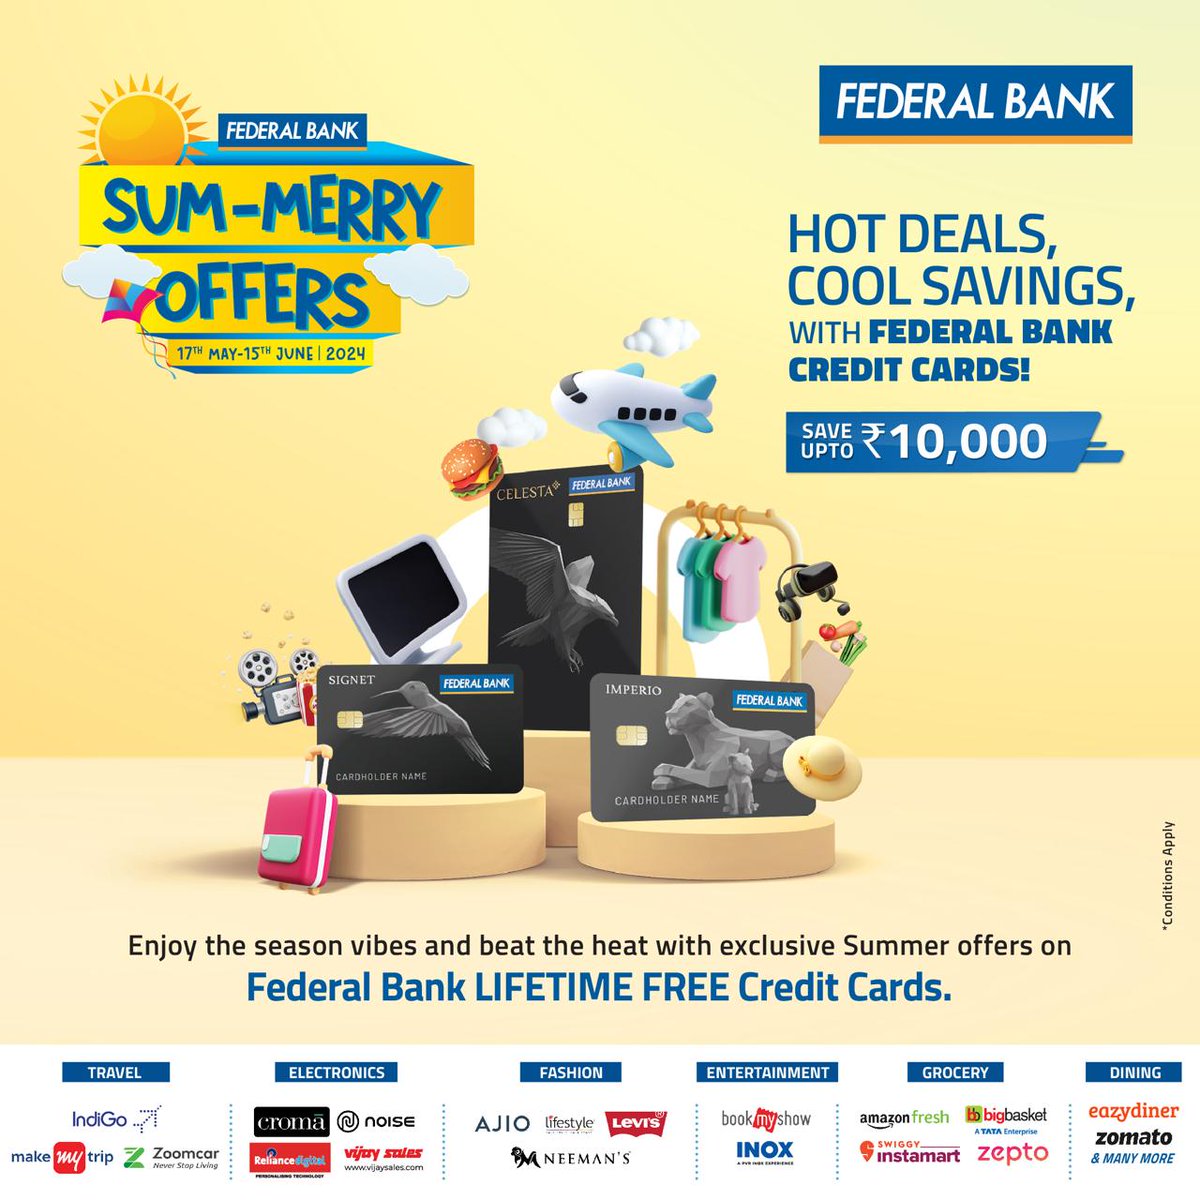 SUM-MERRY OFFERS ARE NOW LIVE ! Make a splash this summer with exclusive offers on Federal Bank Lifetime Credit Cards. Dive in and save big up to ₹10,000 across all categories. Visit federalbank.co.in/summer-offers for more details. #SumMerryOffers #FederalBankCreditCard